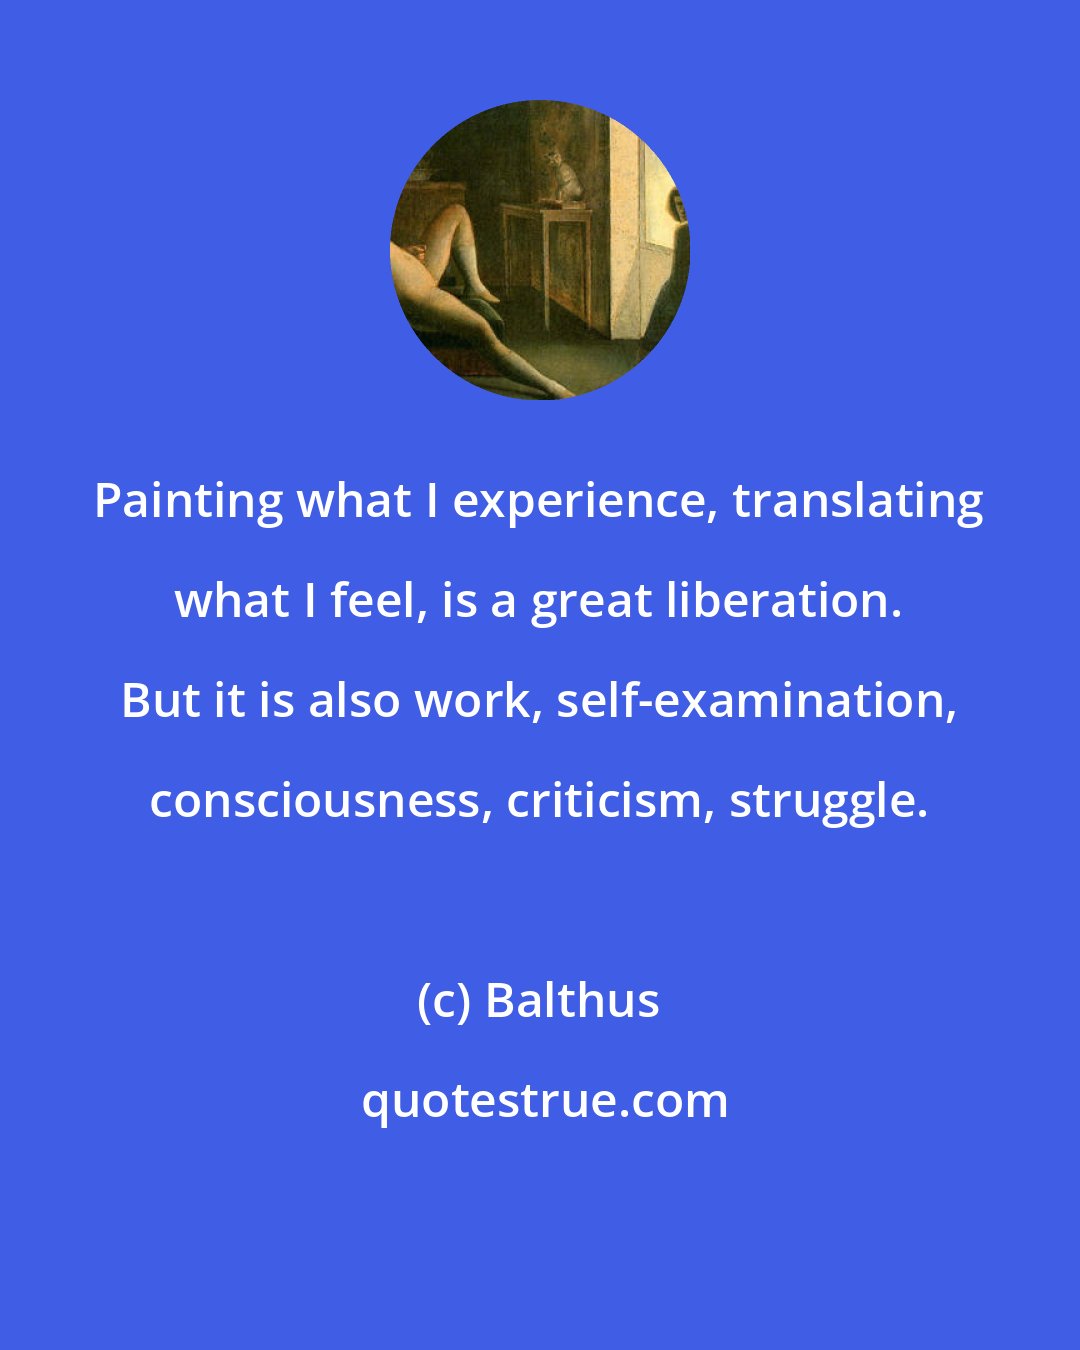 Balthus: Painting what I experience, translating what I feel, is a great liberation. But it is also work, self-examination, consciousness, criticism, struggle.